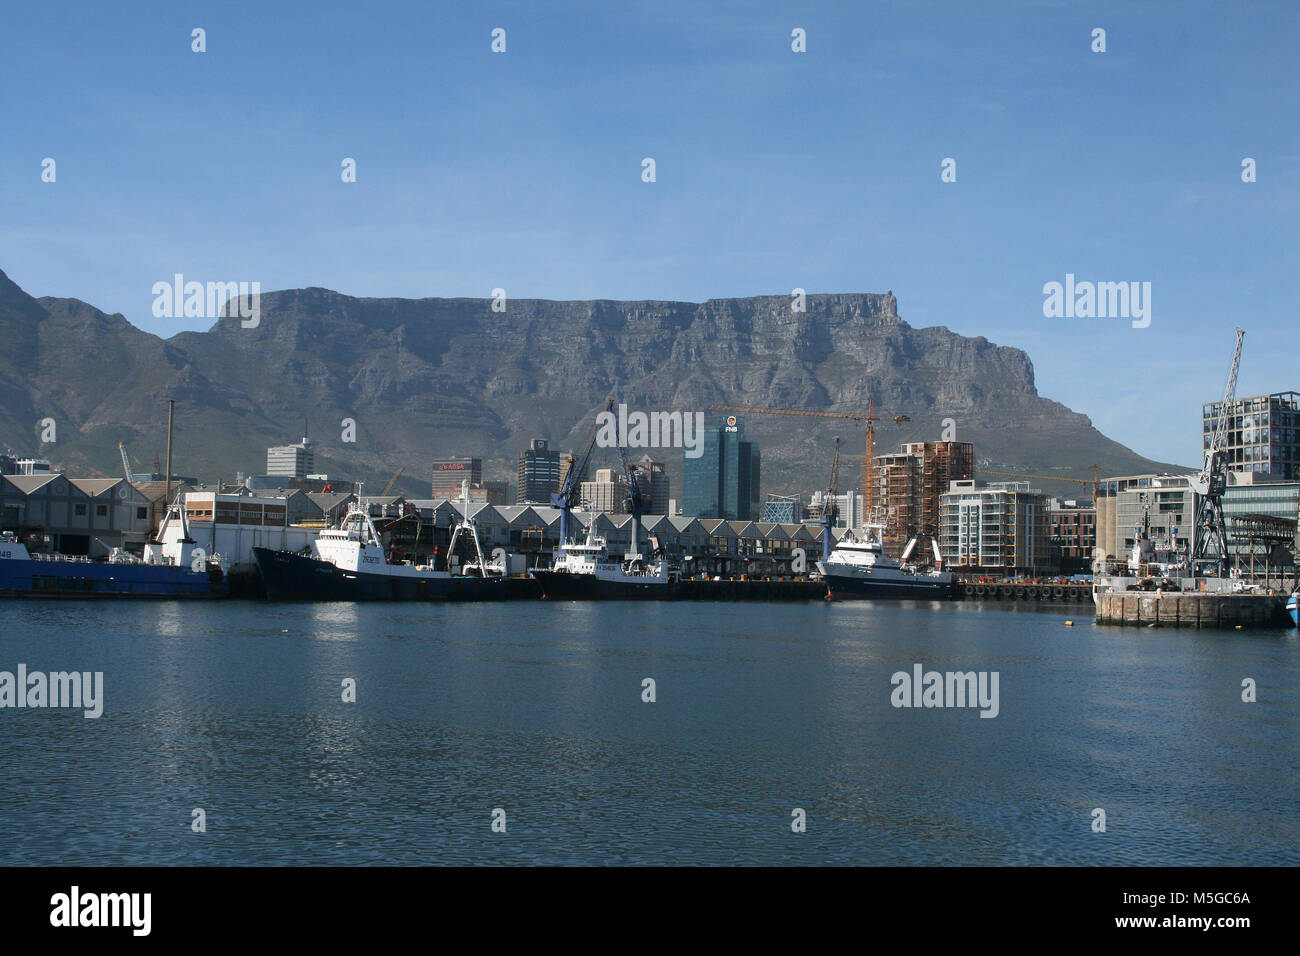 V&A Waterfront, (Victoria & Alfred Waterfront), Table Mountain, Cape Town, South Africa Stock Photo